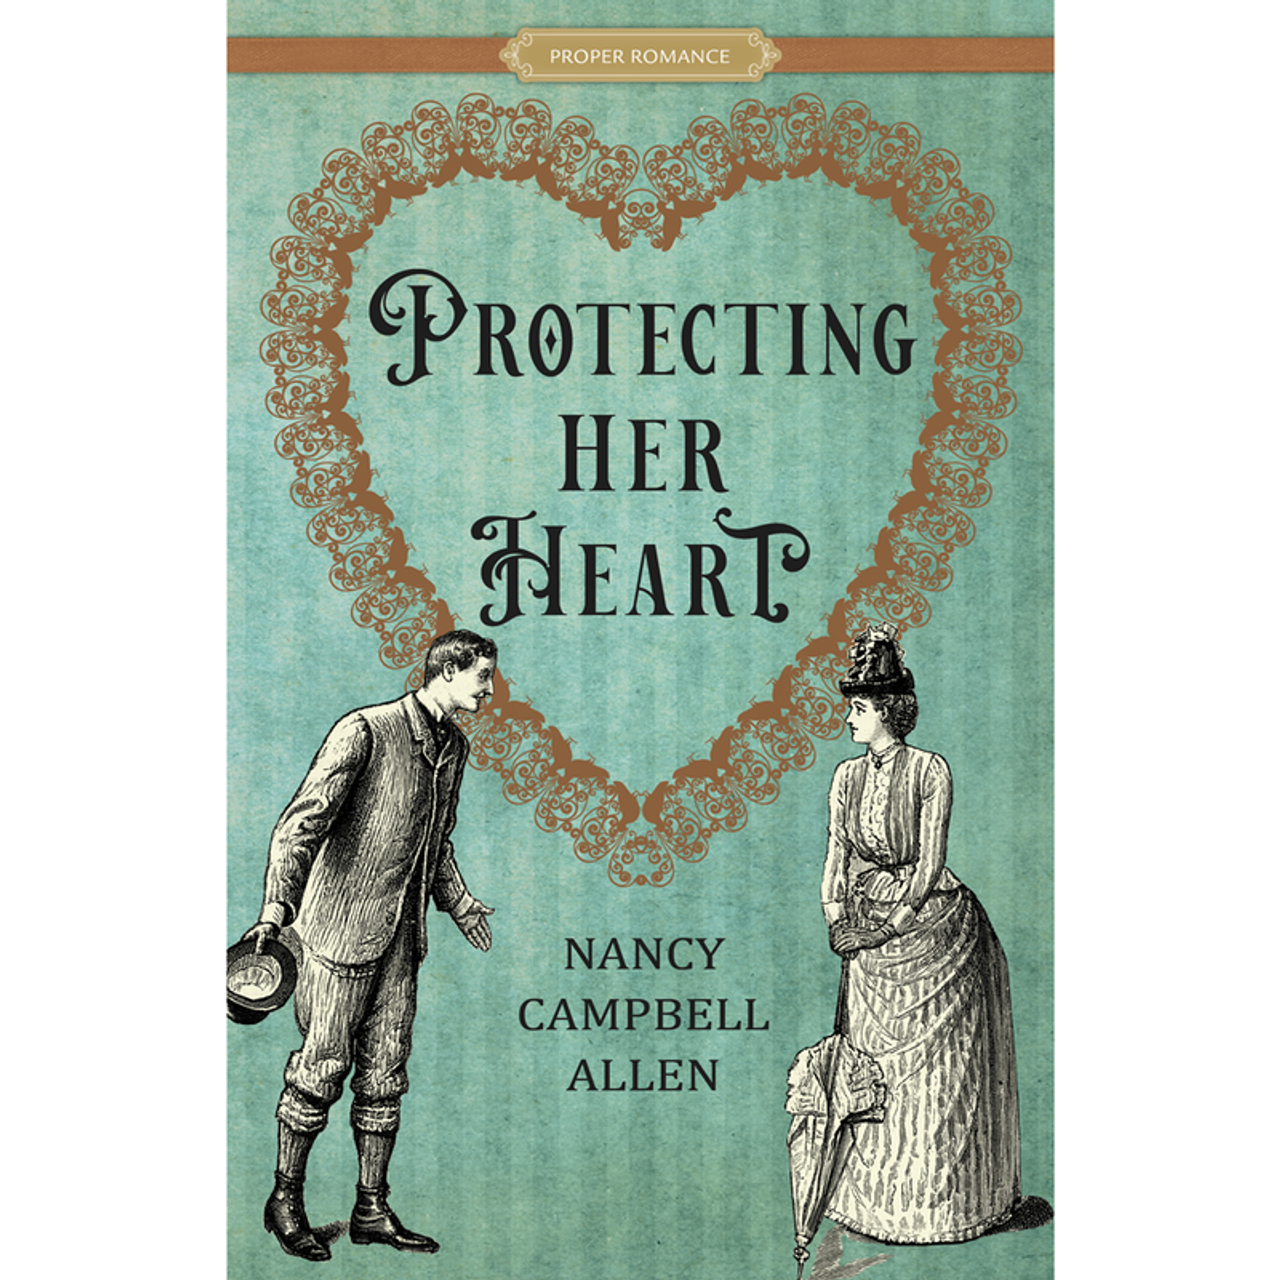 Protecting Her Heart: A Proper Romance (Paperback)